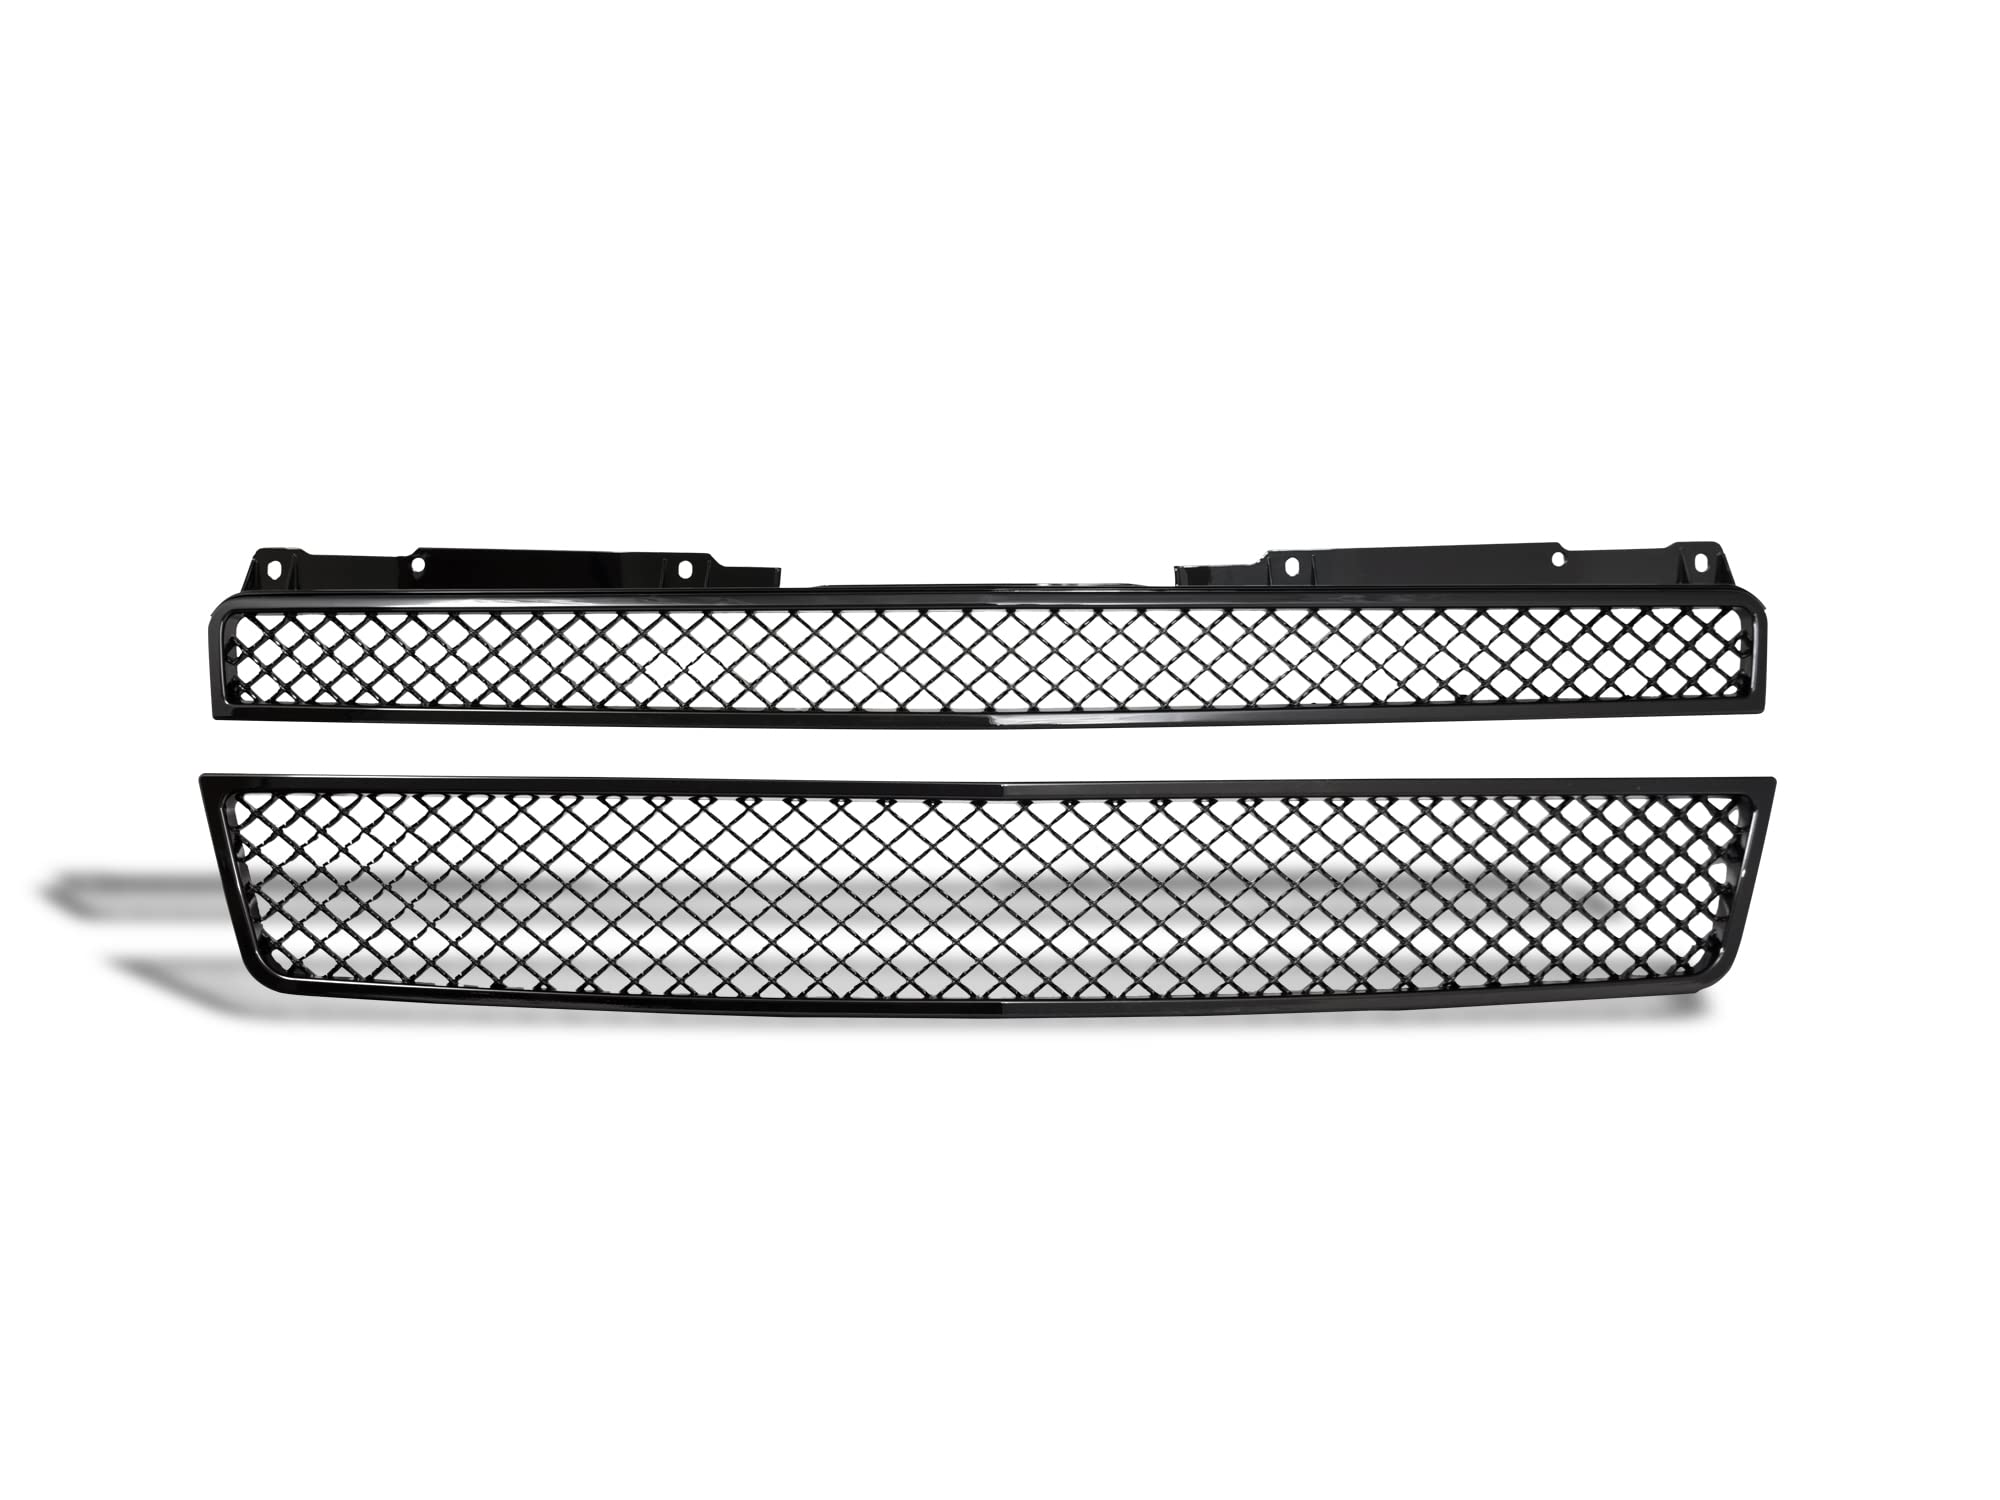 Armordillo USA 7146969 Mesh Front Hood Grille - Gloss Black Fits 2007-2014 Chevy Avalanche